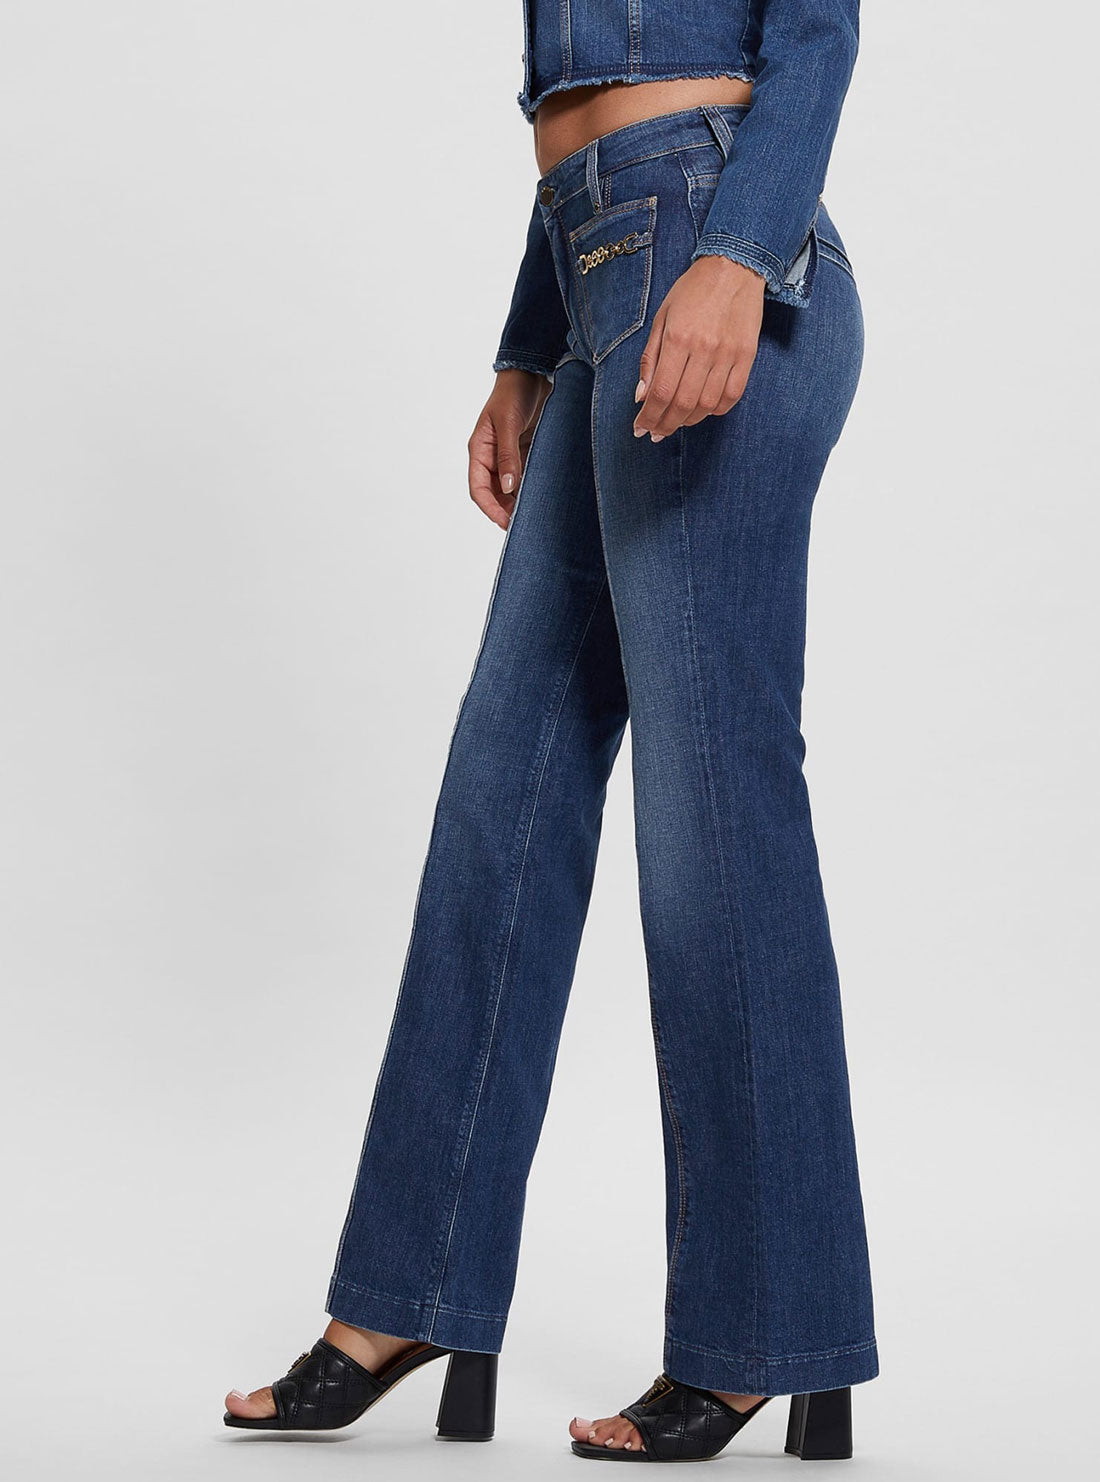 Eco Blue Chain Pocket Sexy Bootcut Denim Jeans | GUESS Women's Apparel | side view